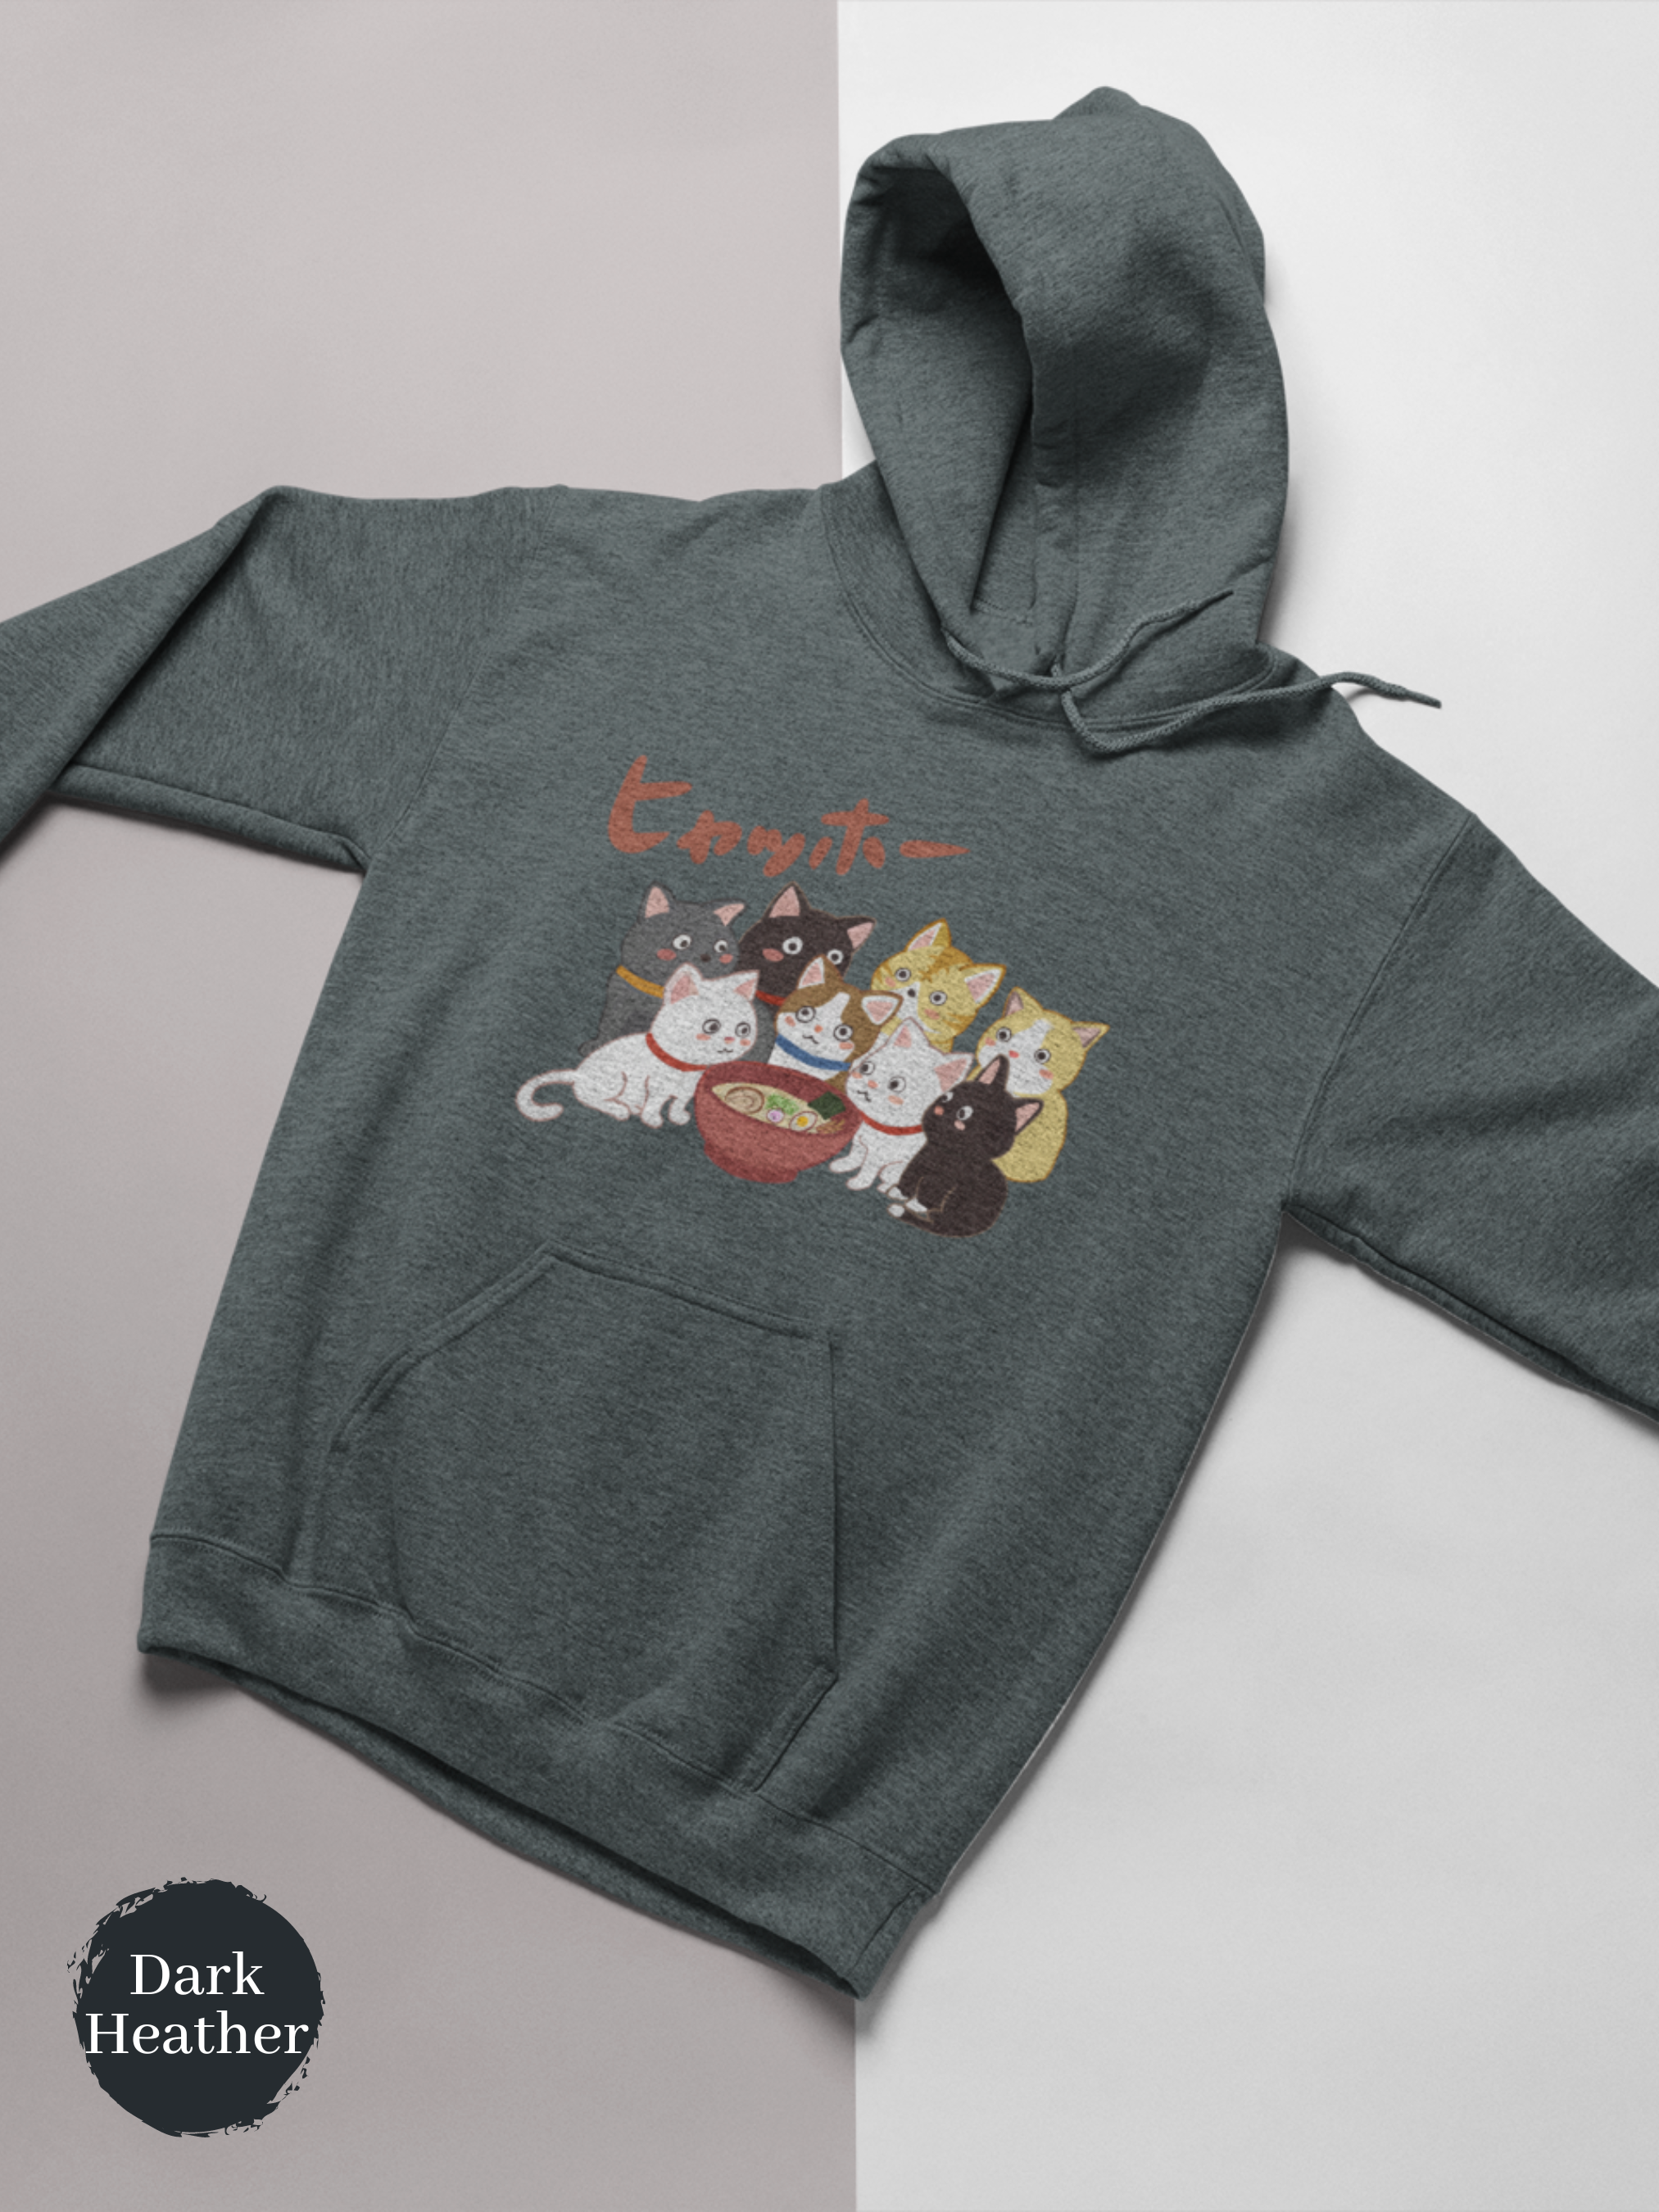 Ramen Hoodie - 'Hyahho!' Cute Cat Gang and Delicious Ramen Bowl Design, Perfect for Foodie Hoodies and Ramen Art Lovers